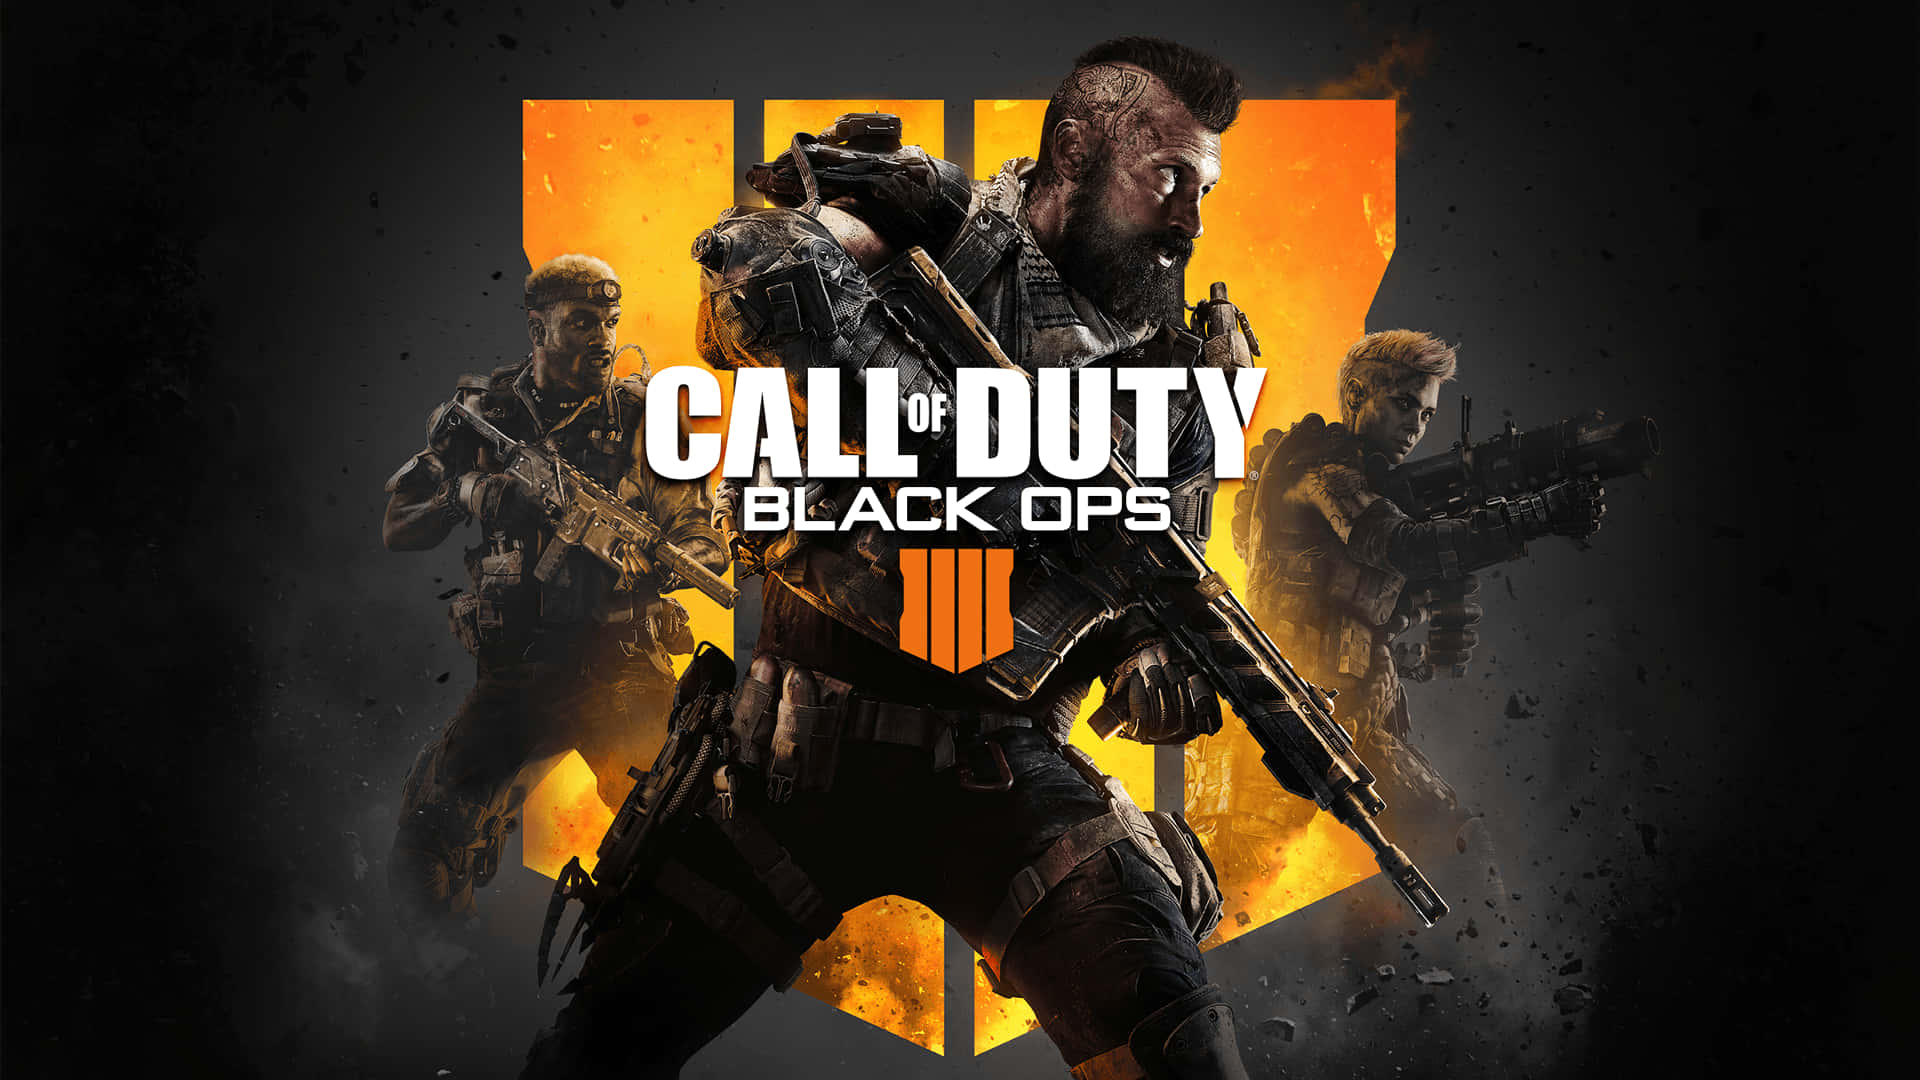 Immerse yourself in the world of Call of Duty Black Ops 4